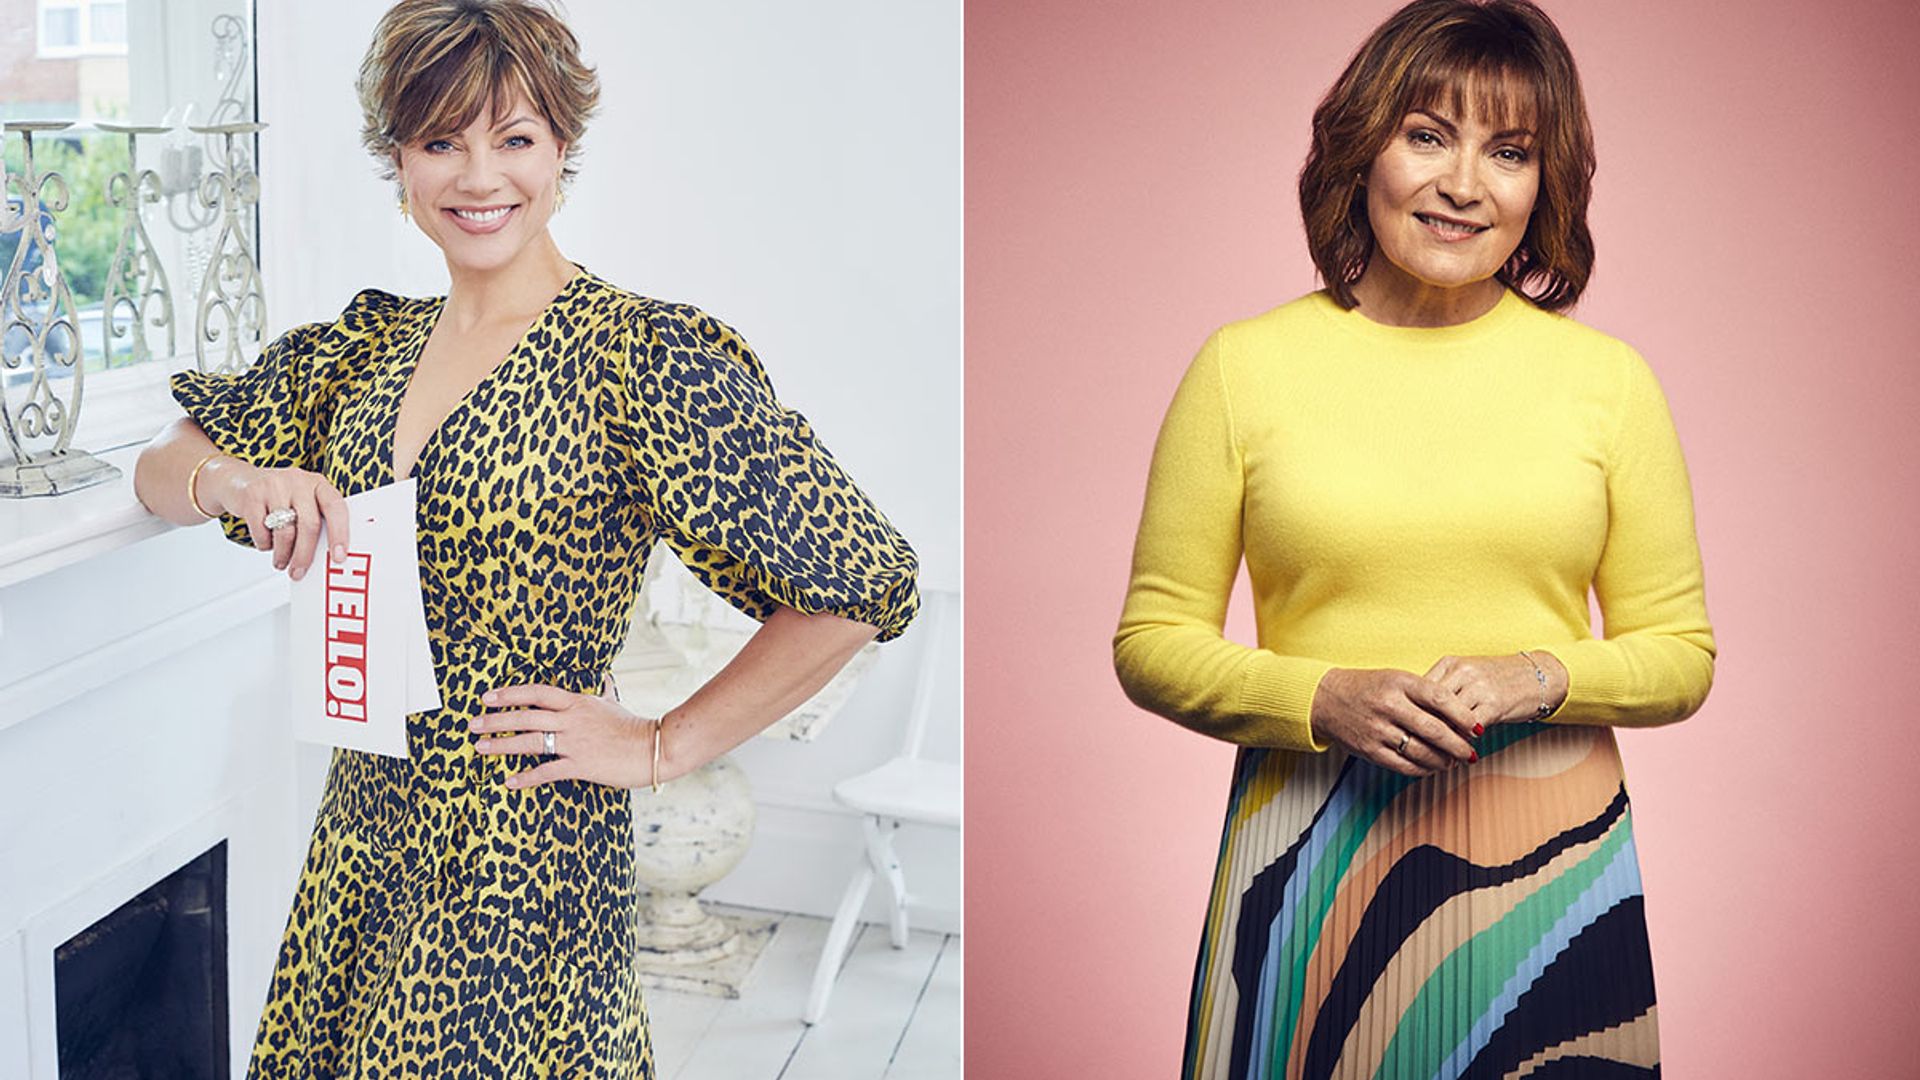 Strictly's Kate Silverton and Lorraine Kelly help launch HELLO!'s Star Women Awards - all the details